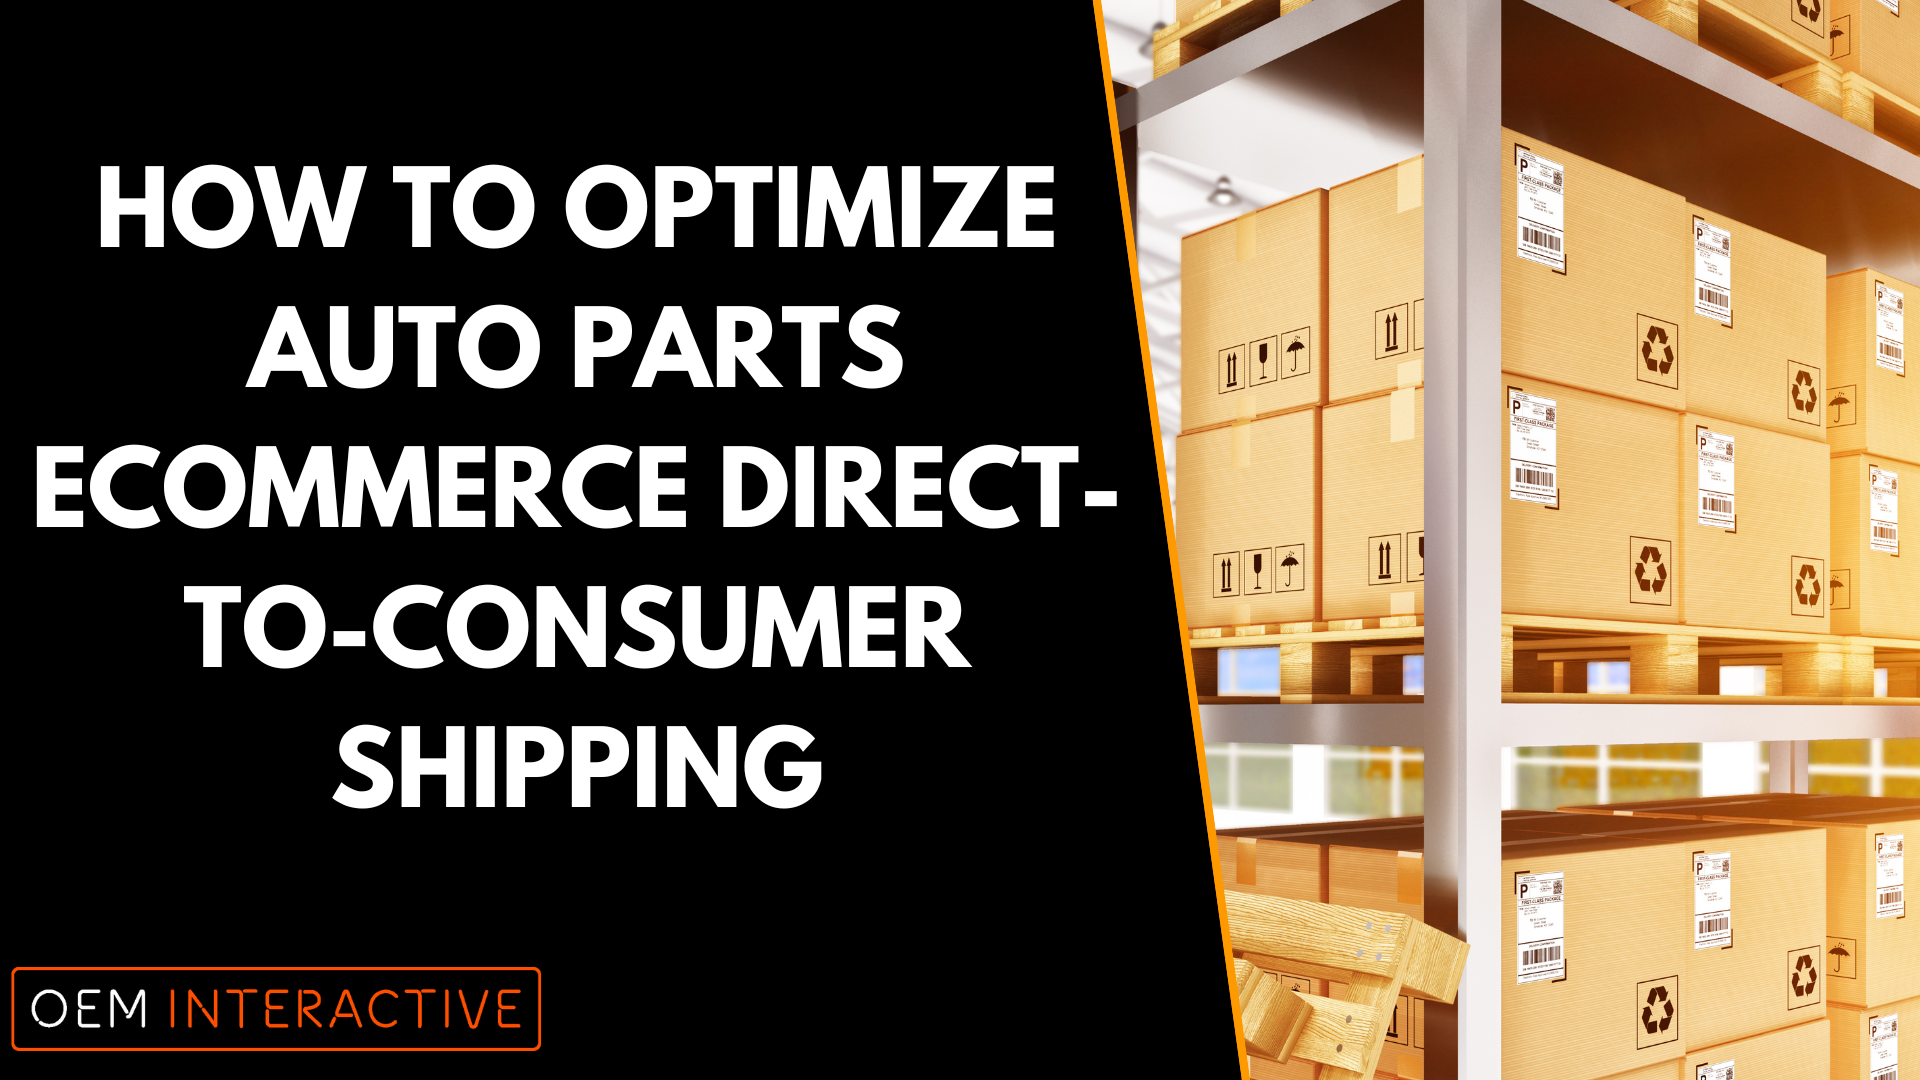 How to Optimize Auto Parts eCommerce Direct-to-Consumer Shipping-Featured Image